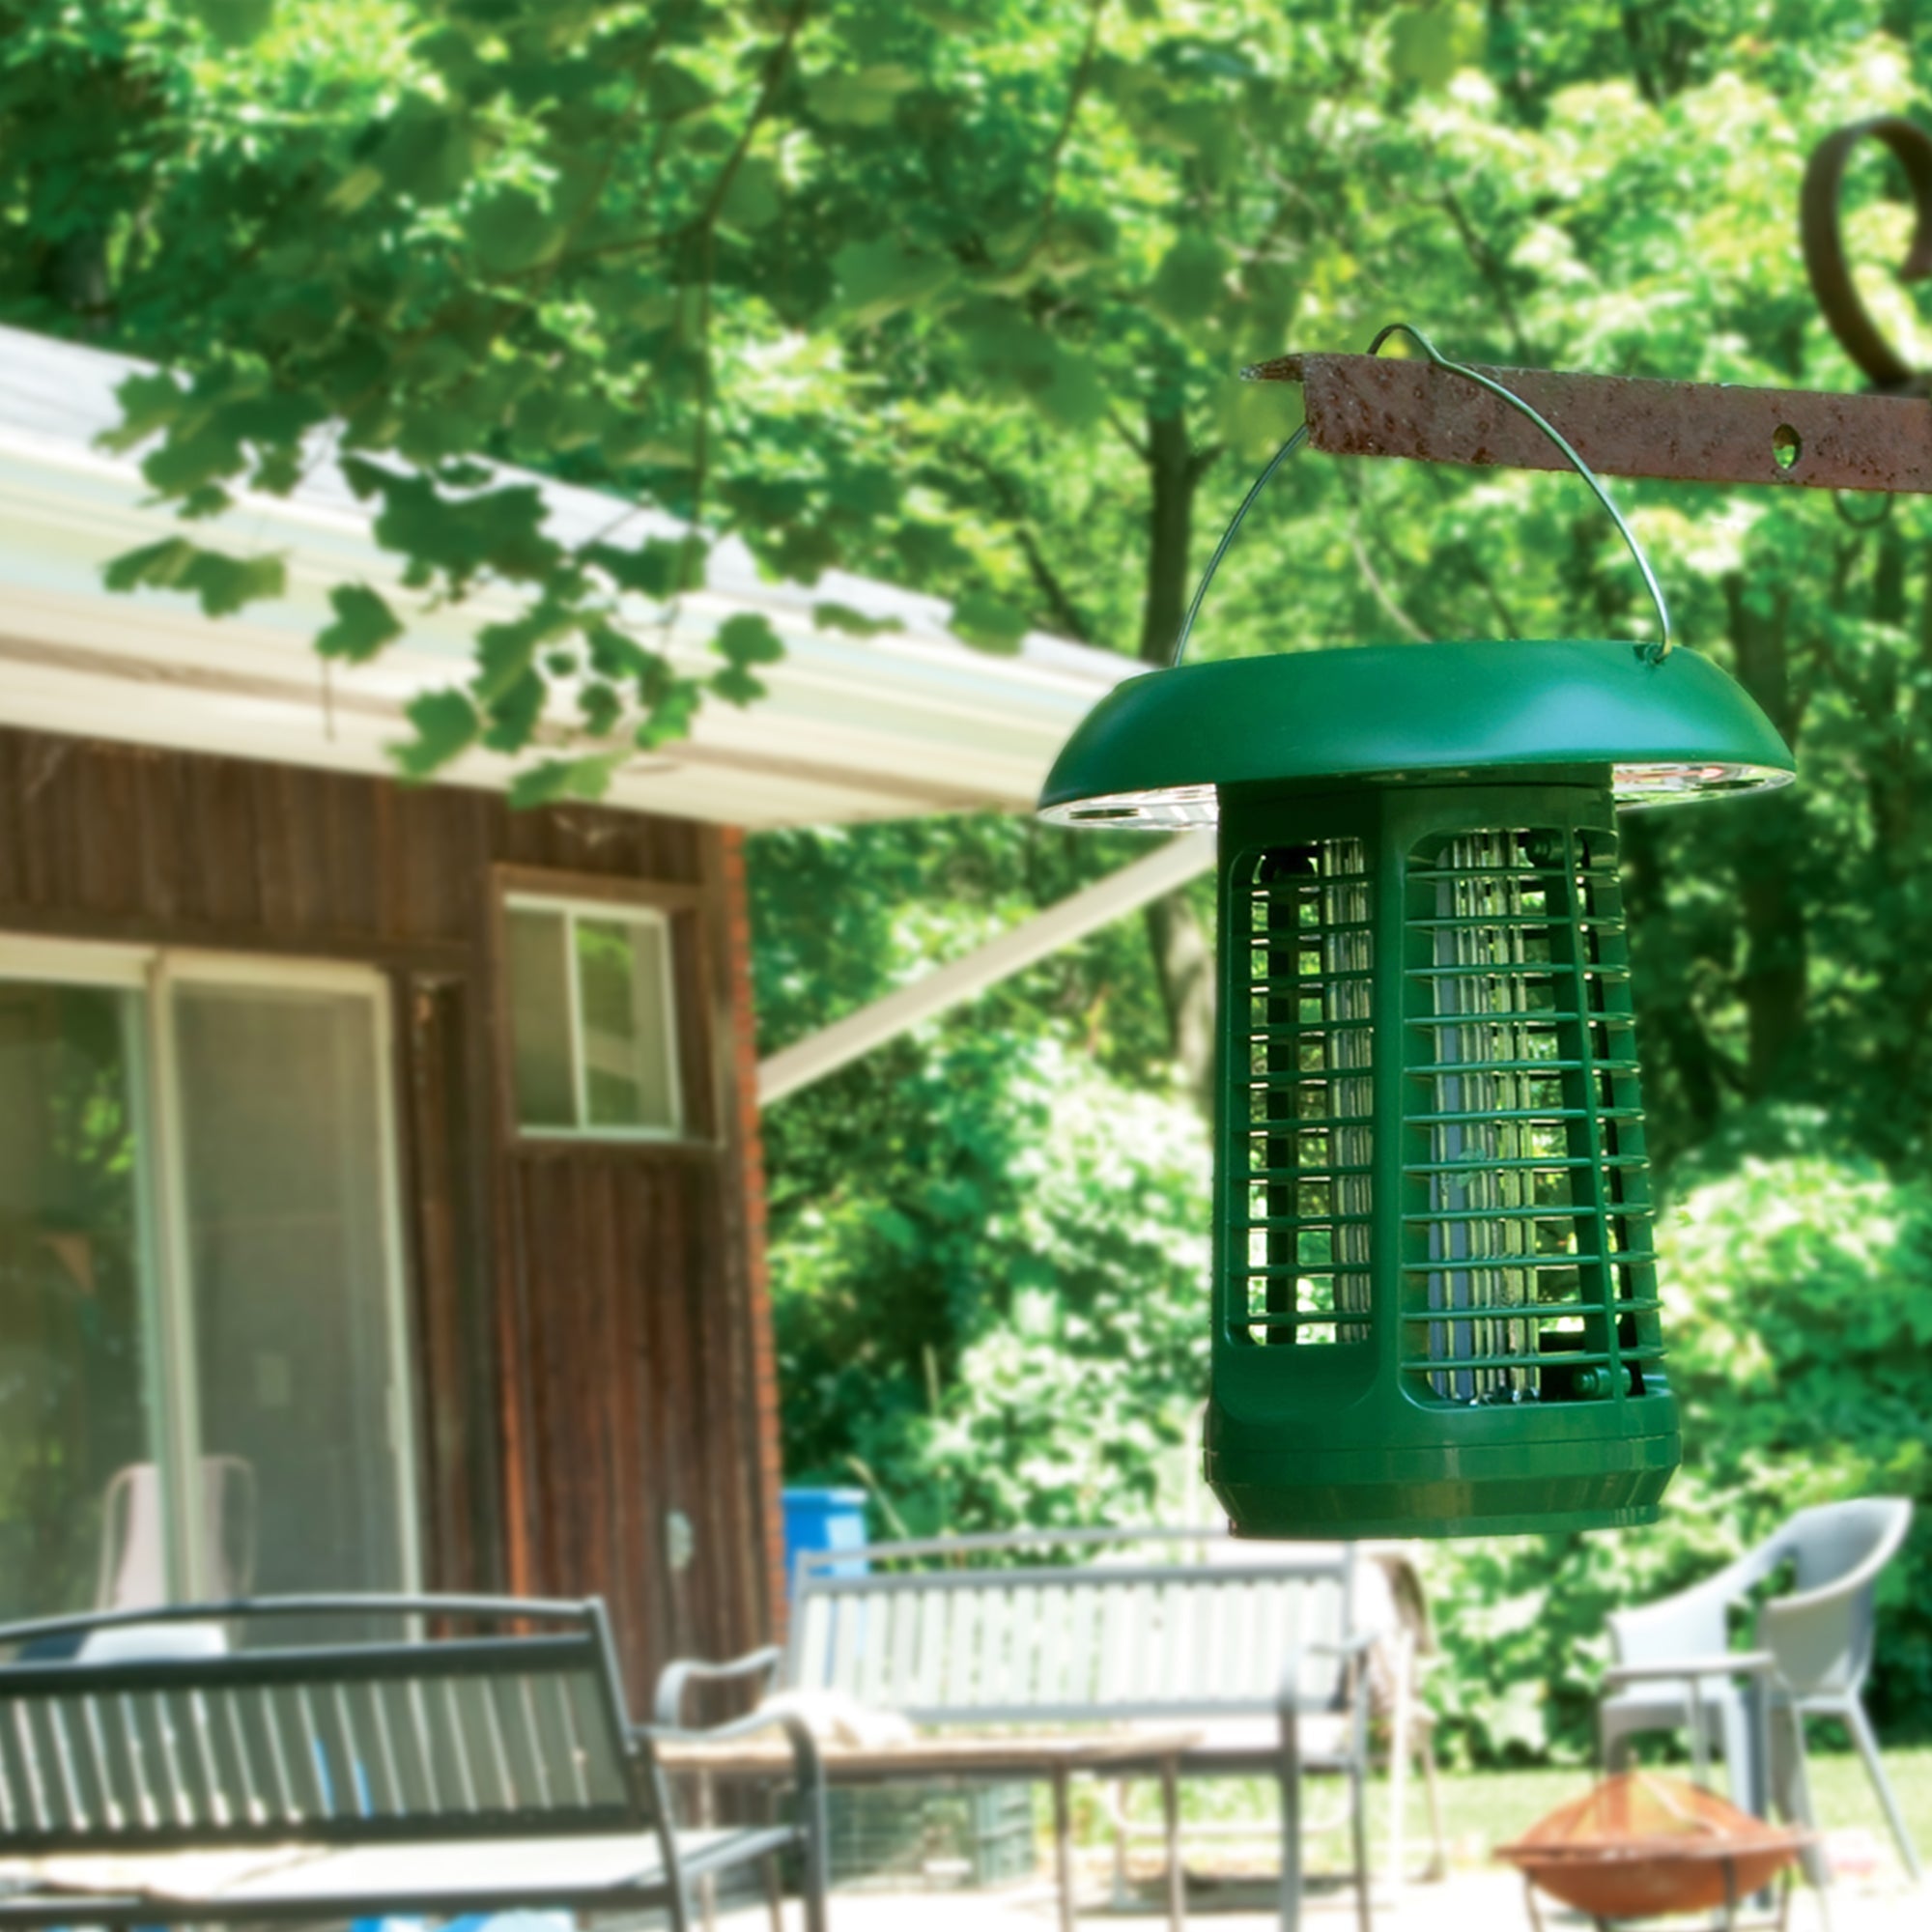 Lifestyle image of Bite Shield solar powered electronic flying insect zapper hanging from a tree branch outdoors with branches, leaves, and the exterior of a house in the background